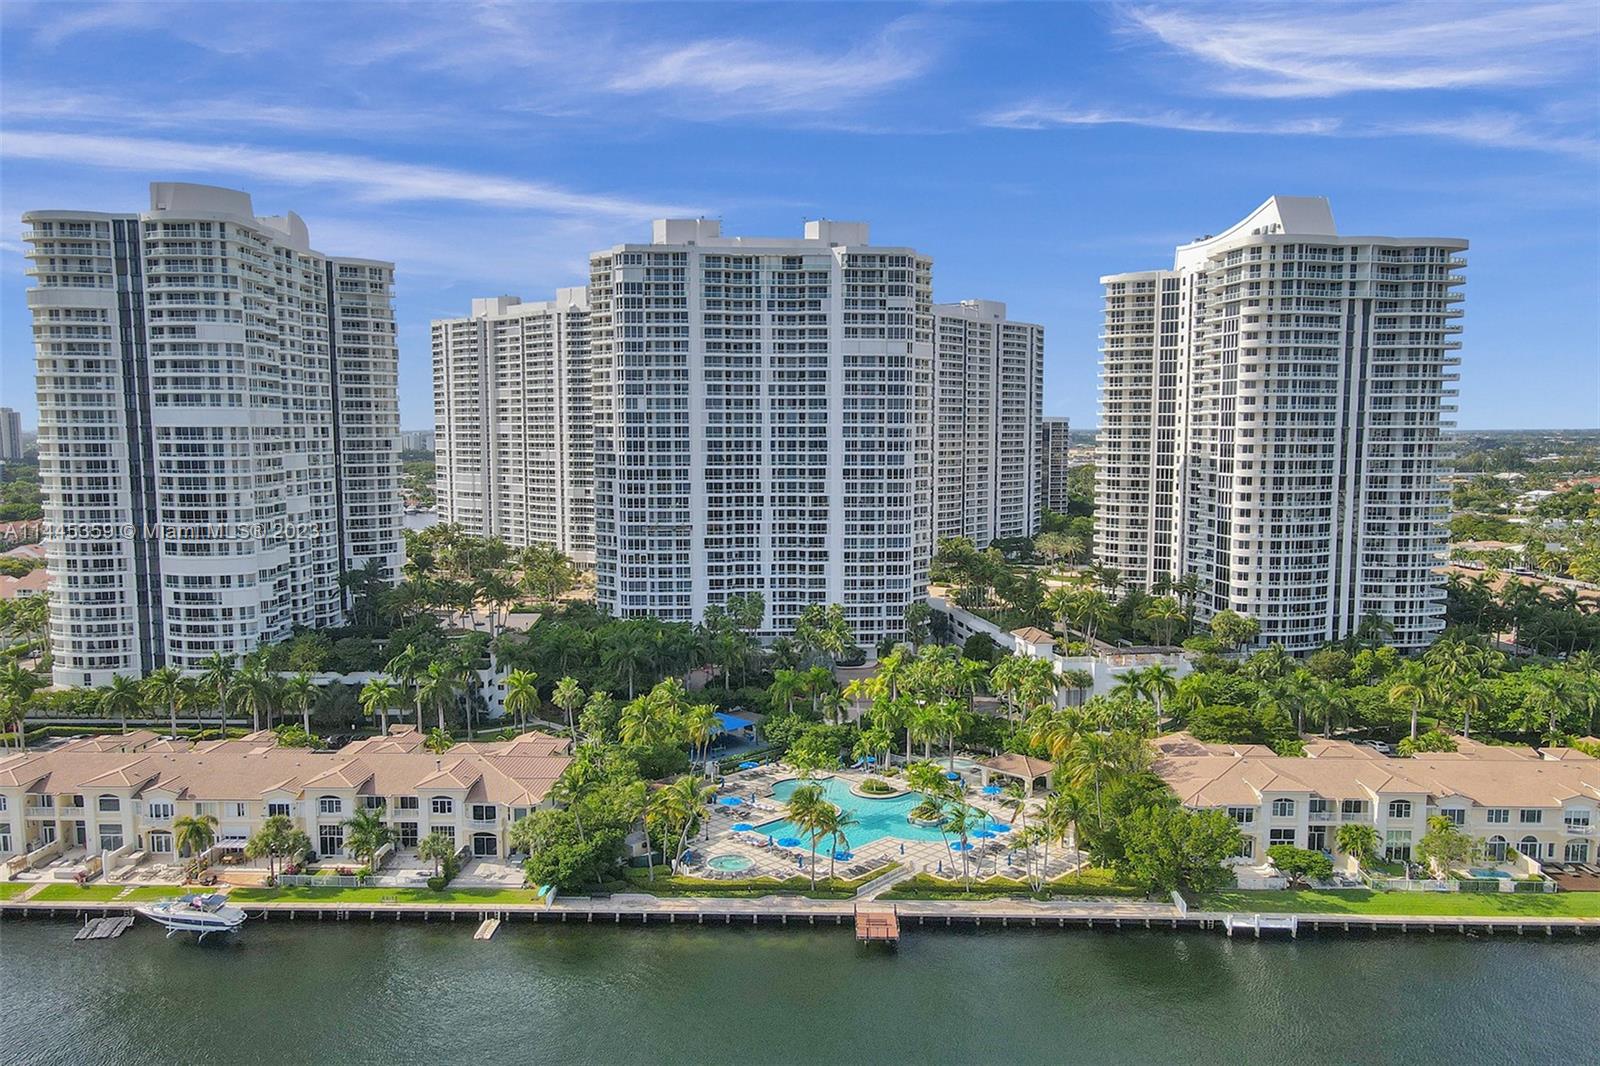 21205 Yacht Club Dr Unit 3108, Aventura, Florida, 33180, United States, 3 Bedrooms Bedrooms, ,2 BathroomsBathrooms,Residential,For Sale,21205 Yacht Club Dr Unit 3108,1335261